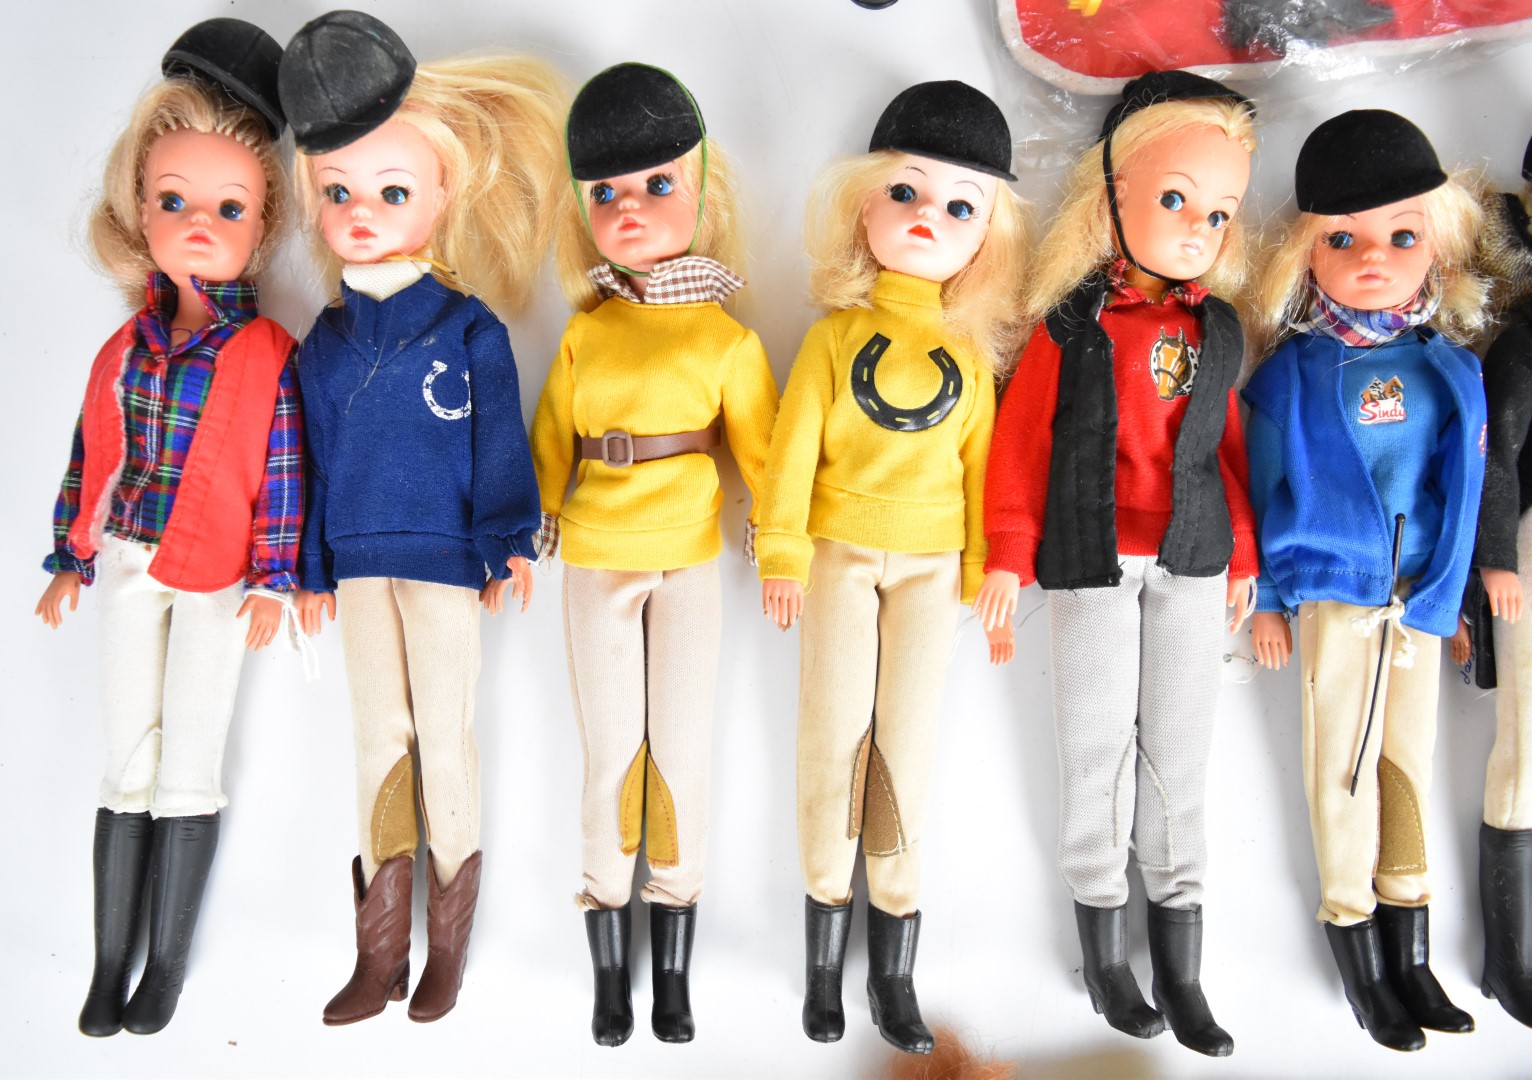 Ten vintage Sindy dolls by Pedigree dressed in 1980's equestrian outfits together with two horses - Image 2 of 4